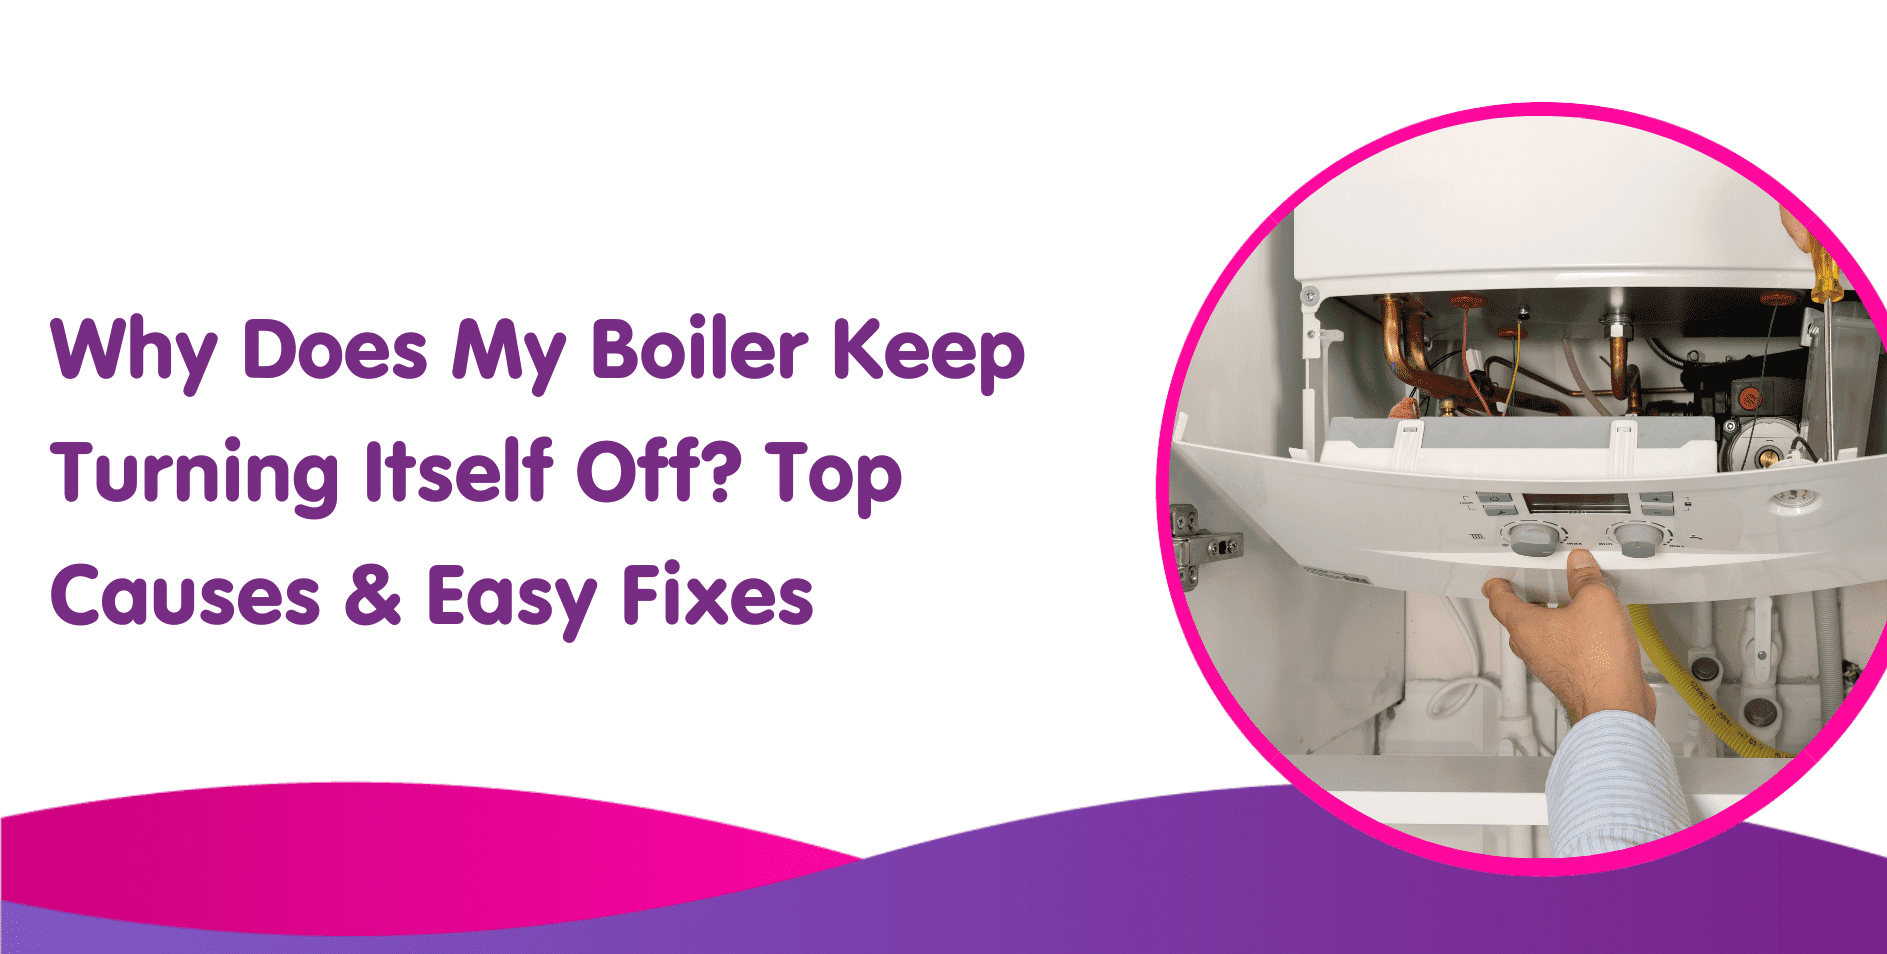 Why Does My Boiler Keep Turning Itself Off? Top Causes & Easy Fixes